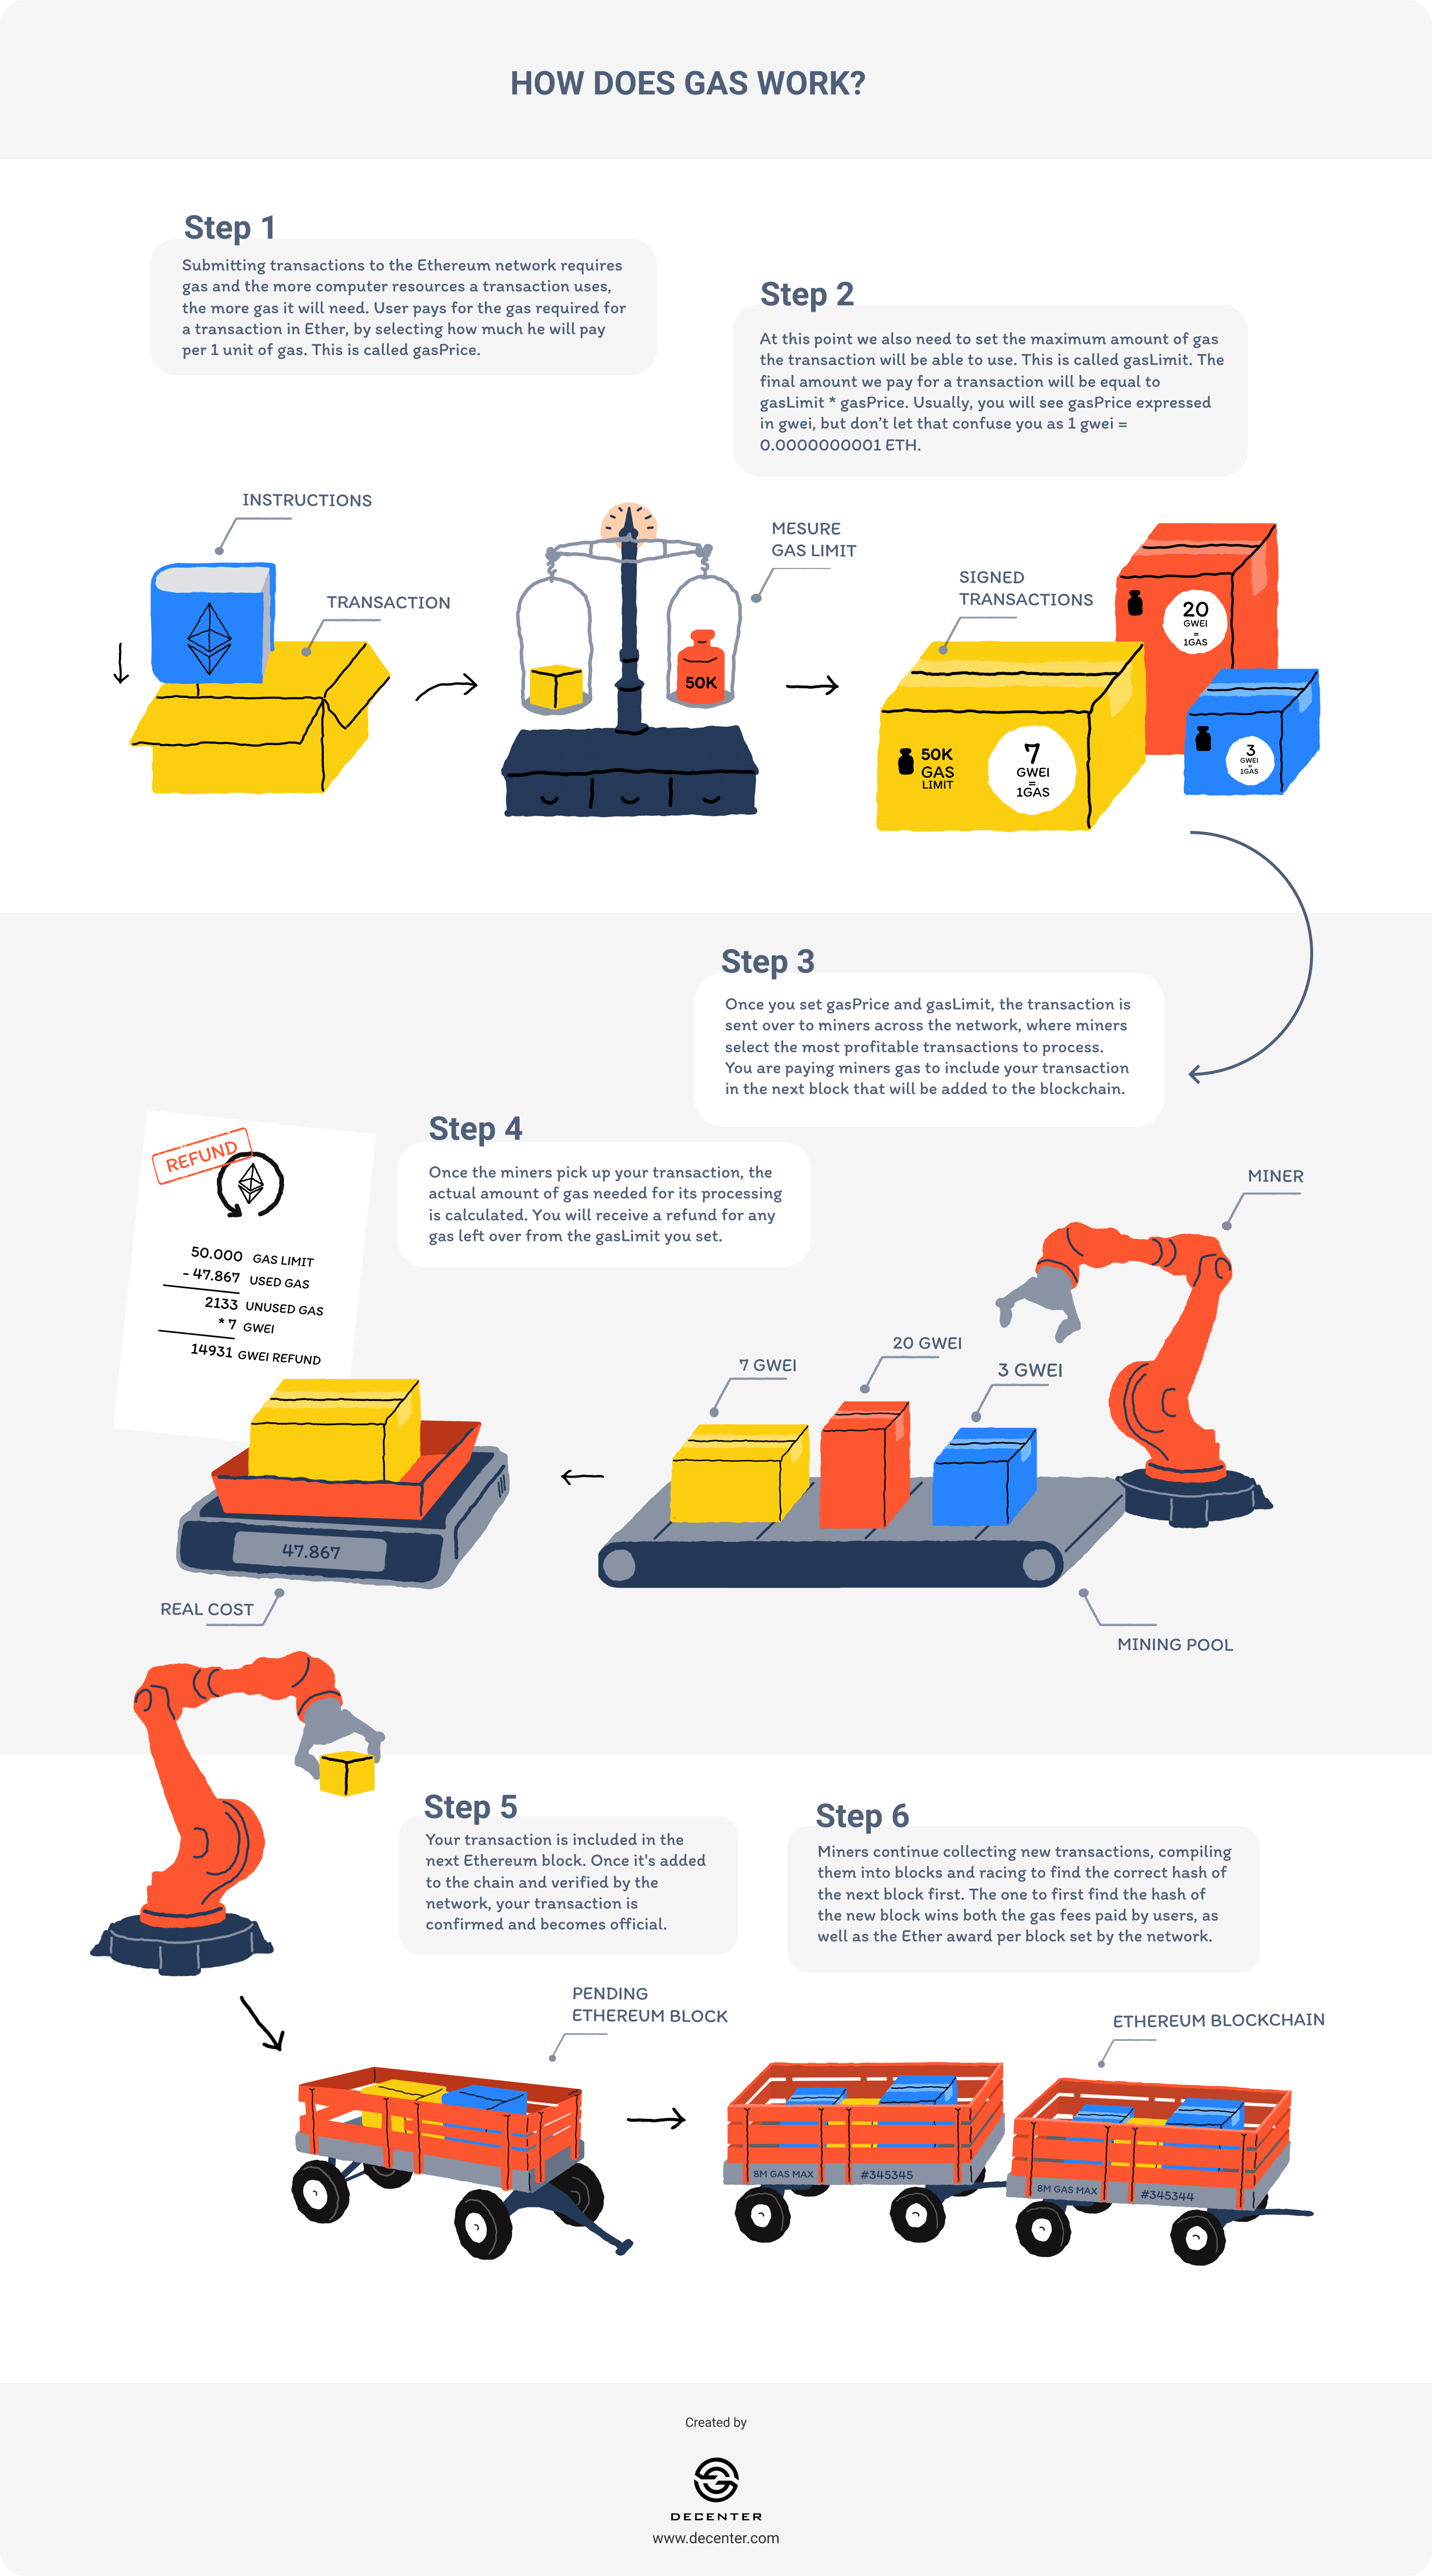 Infographic on how gas works in Ethereum created by Decenter